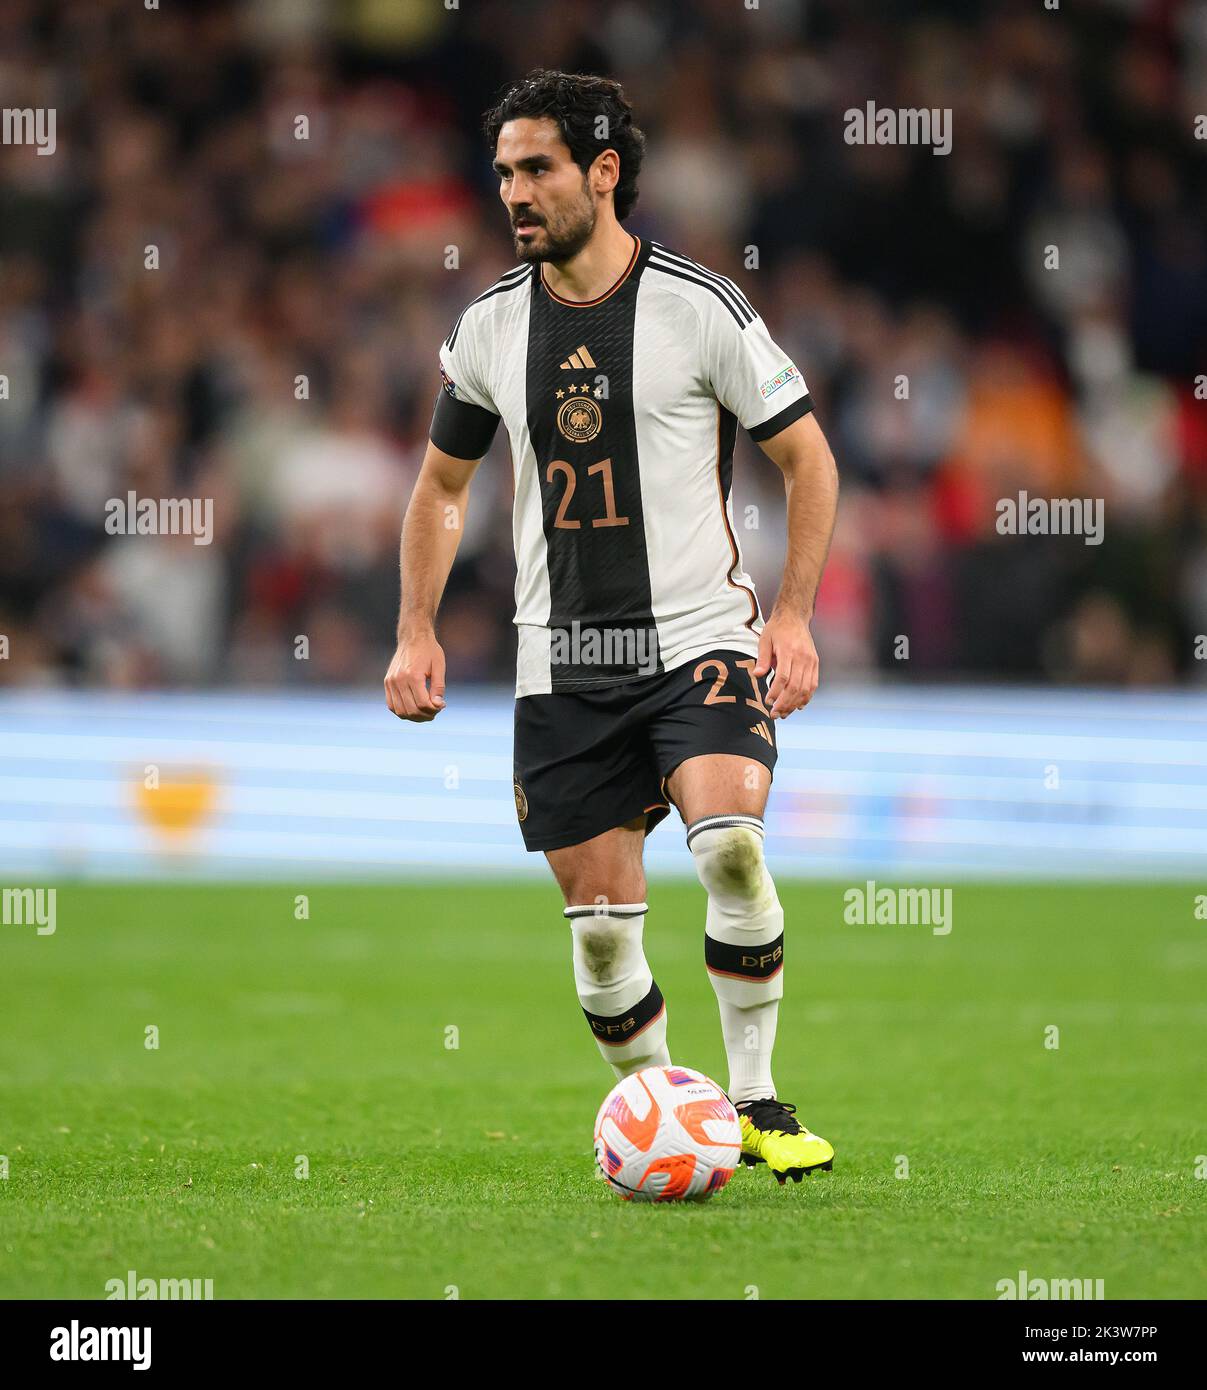 26 Sep 2022 - England v Germany - UEFA Nations League - League A - Group 3 - Wembley Stadium  Germany's Ilkay Gundogan during the UEFA Nations League match against England. Picture : Mark Pain / Alamy Live News Stock Photo